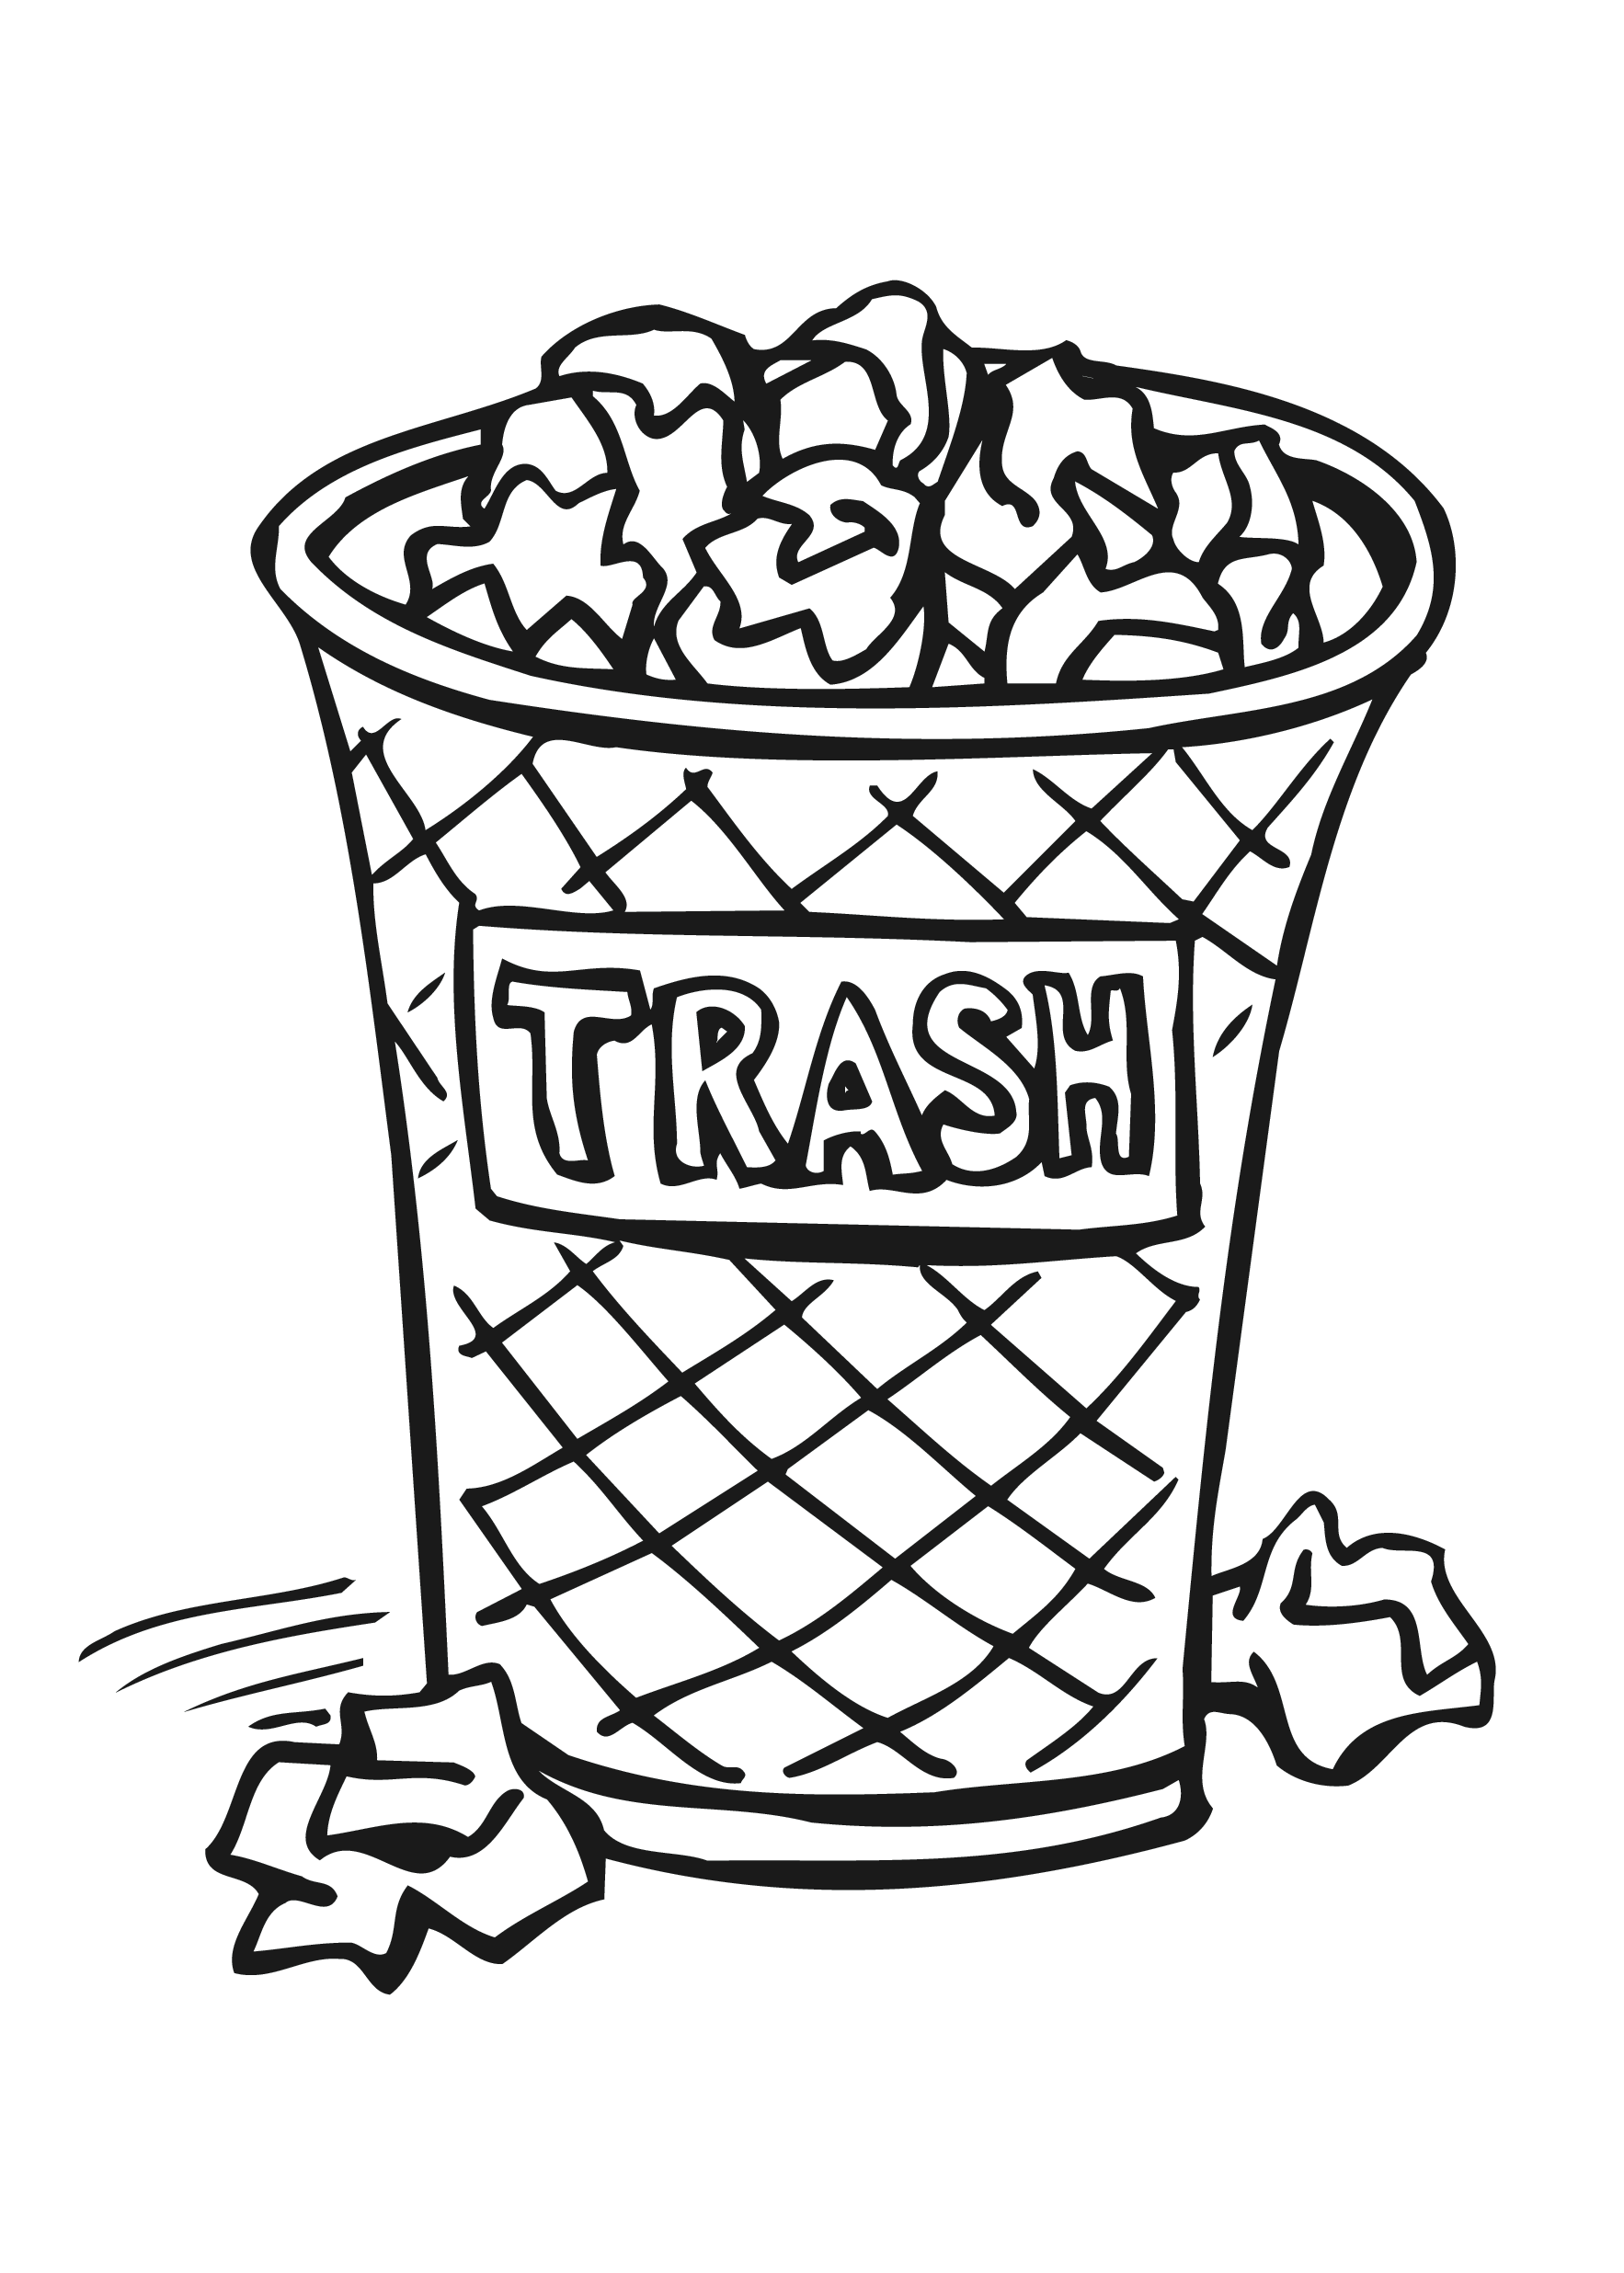 How To Draw A Trash Can For Dummies - ClipArt Best